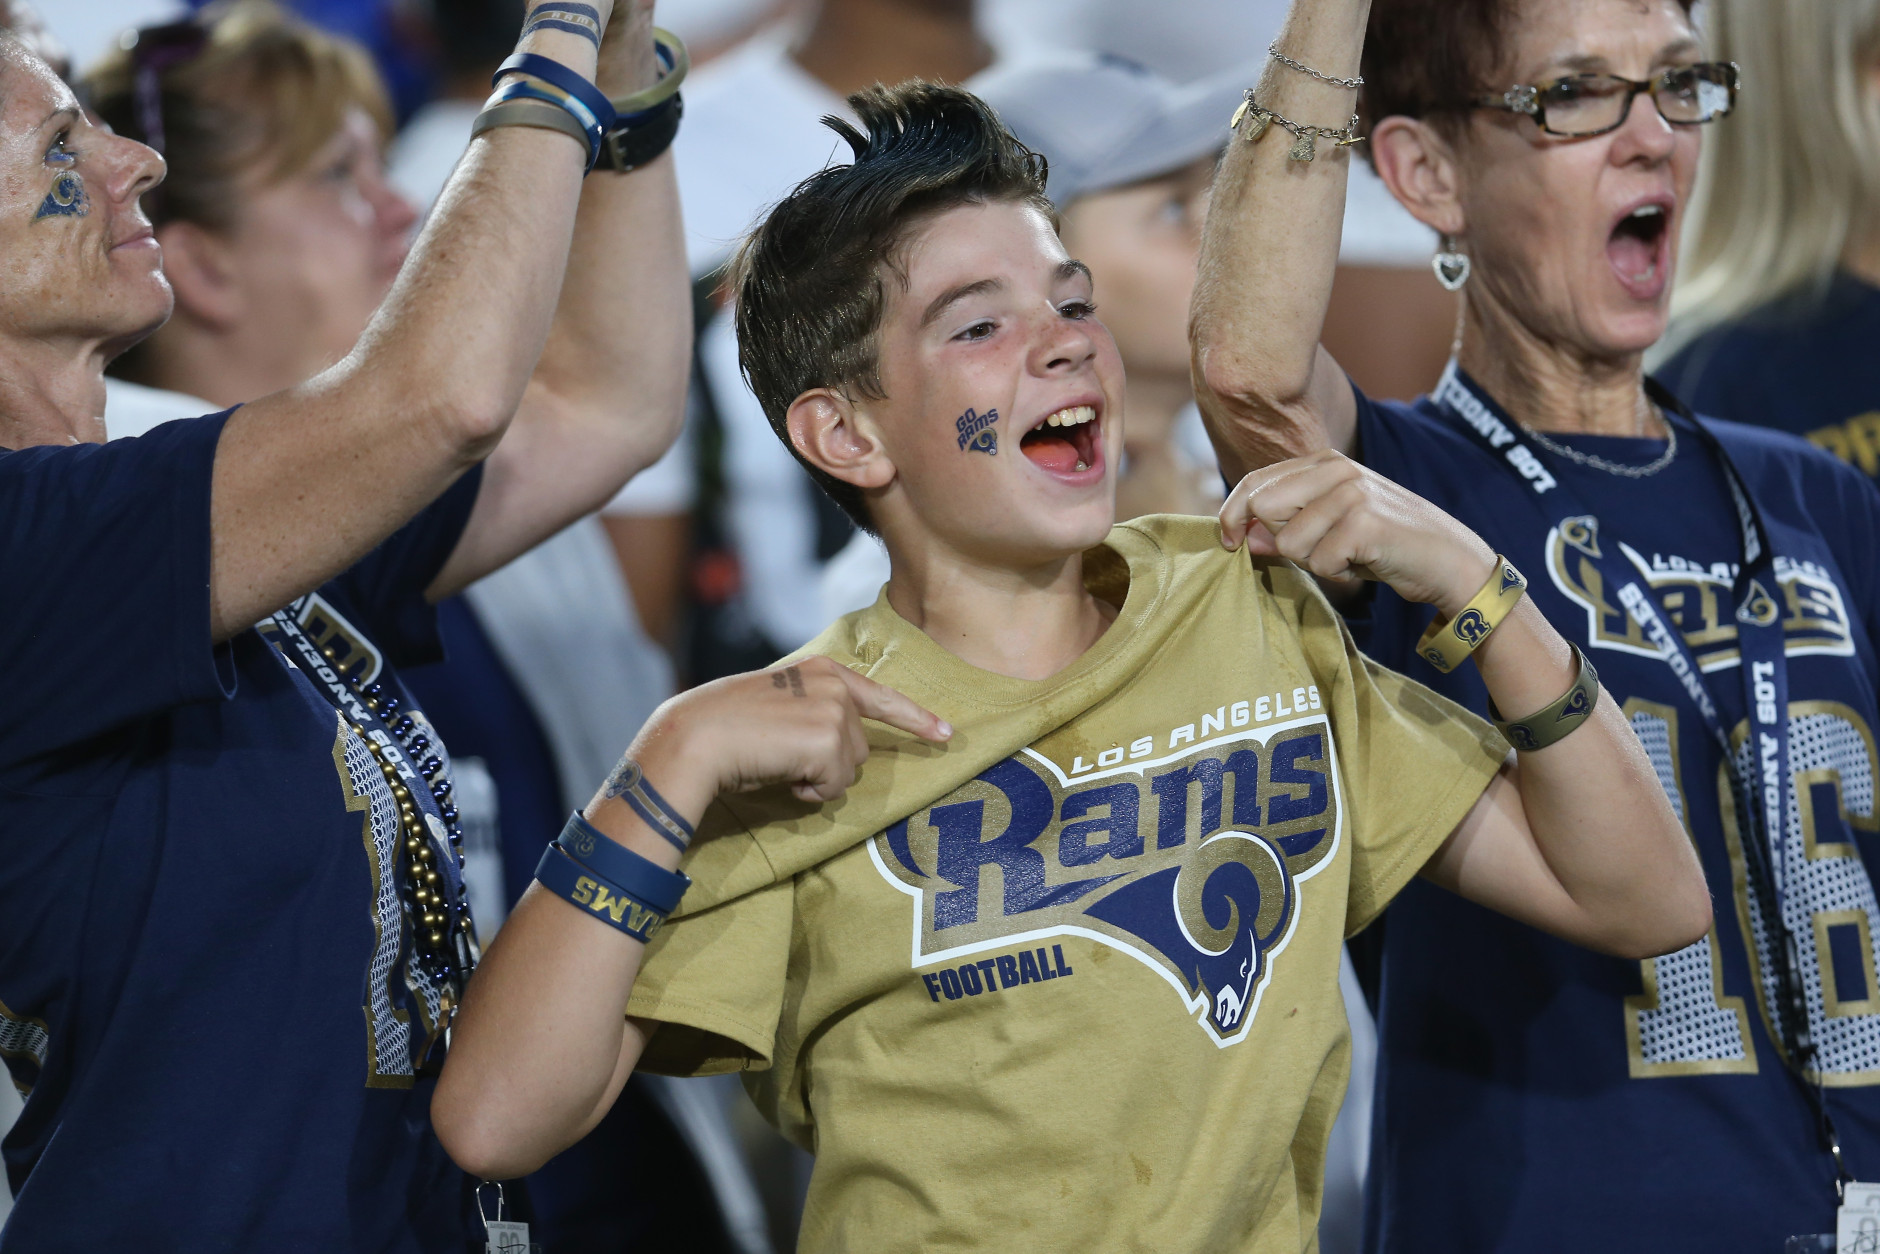 LOS ANGELES, CALIFORNIA - AUGUST 13:  A young Rams fan cheers during the game between the Dallas Cowboys and the Los Angeles Rams at the Los Angeles Coliseum during preseason on August 13, 2016 in Los Angeles, California.  The Rams won 28-24.  (Photo by Stephen Dunn/Getty Images)